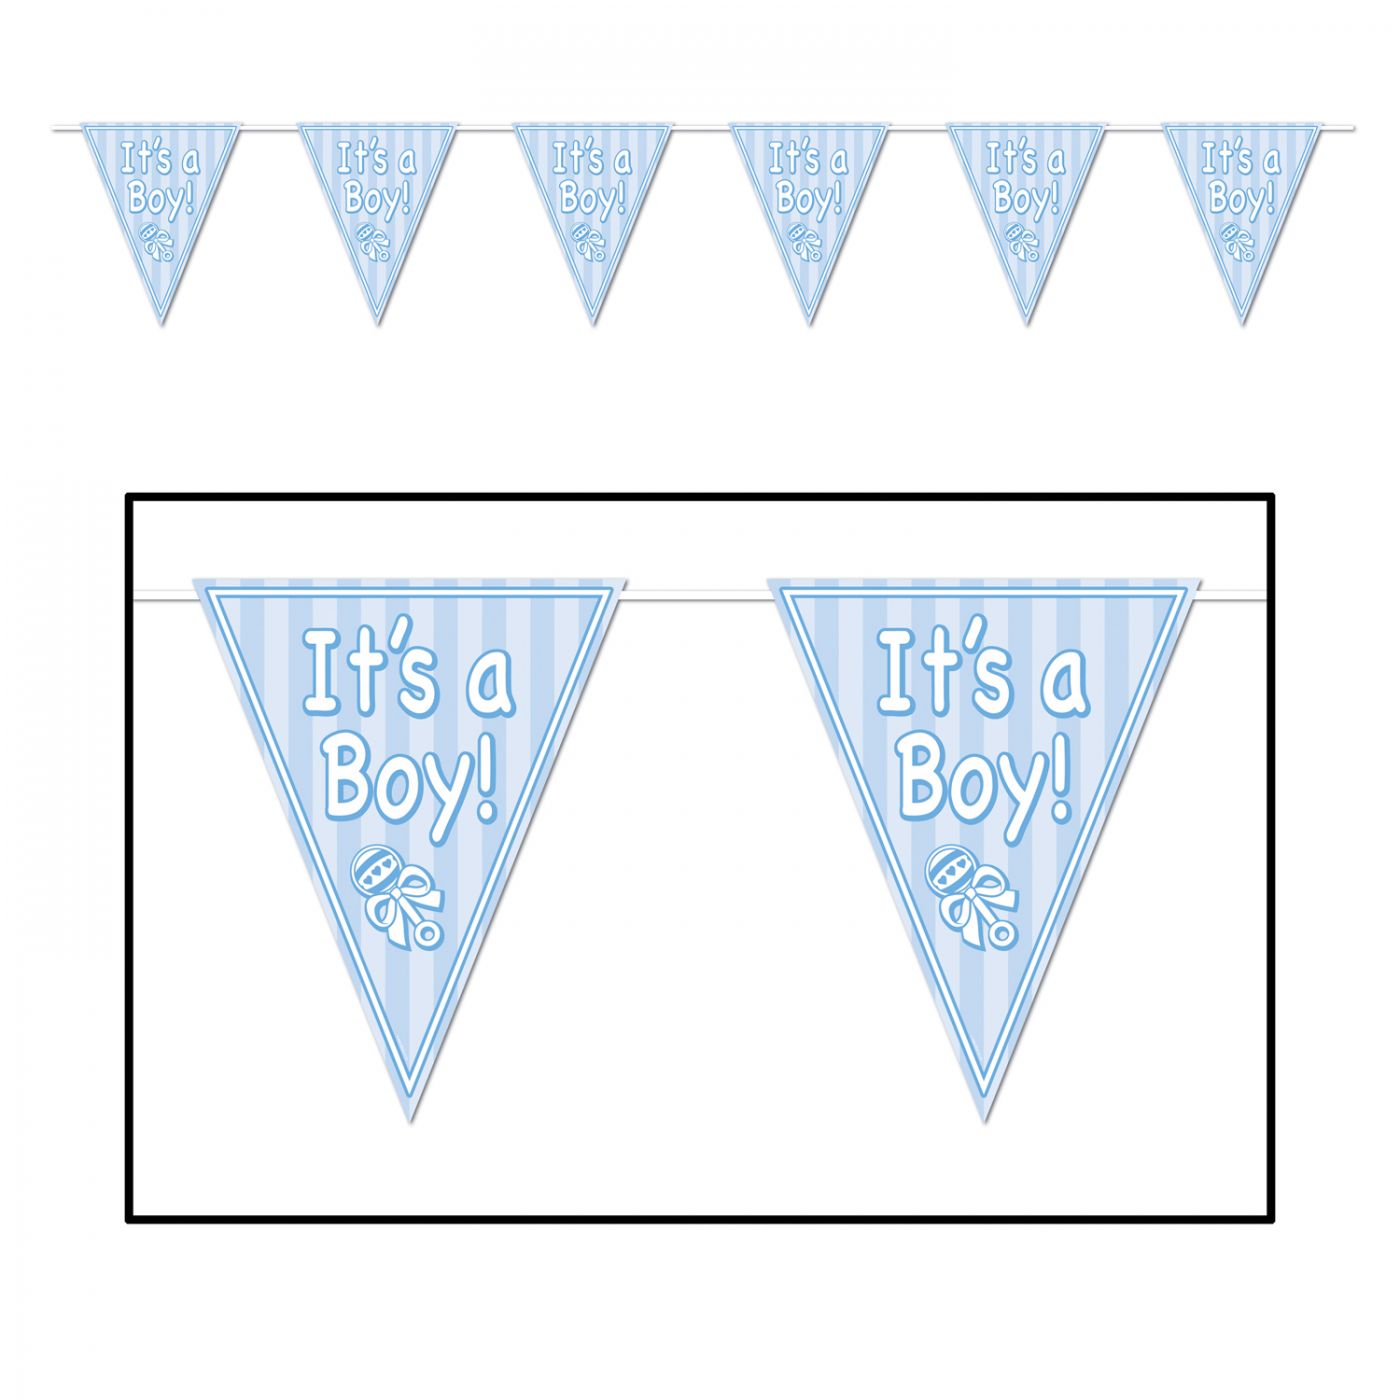 It's A Boy! Pennant Banner (12) image